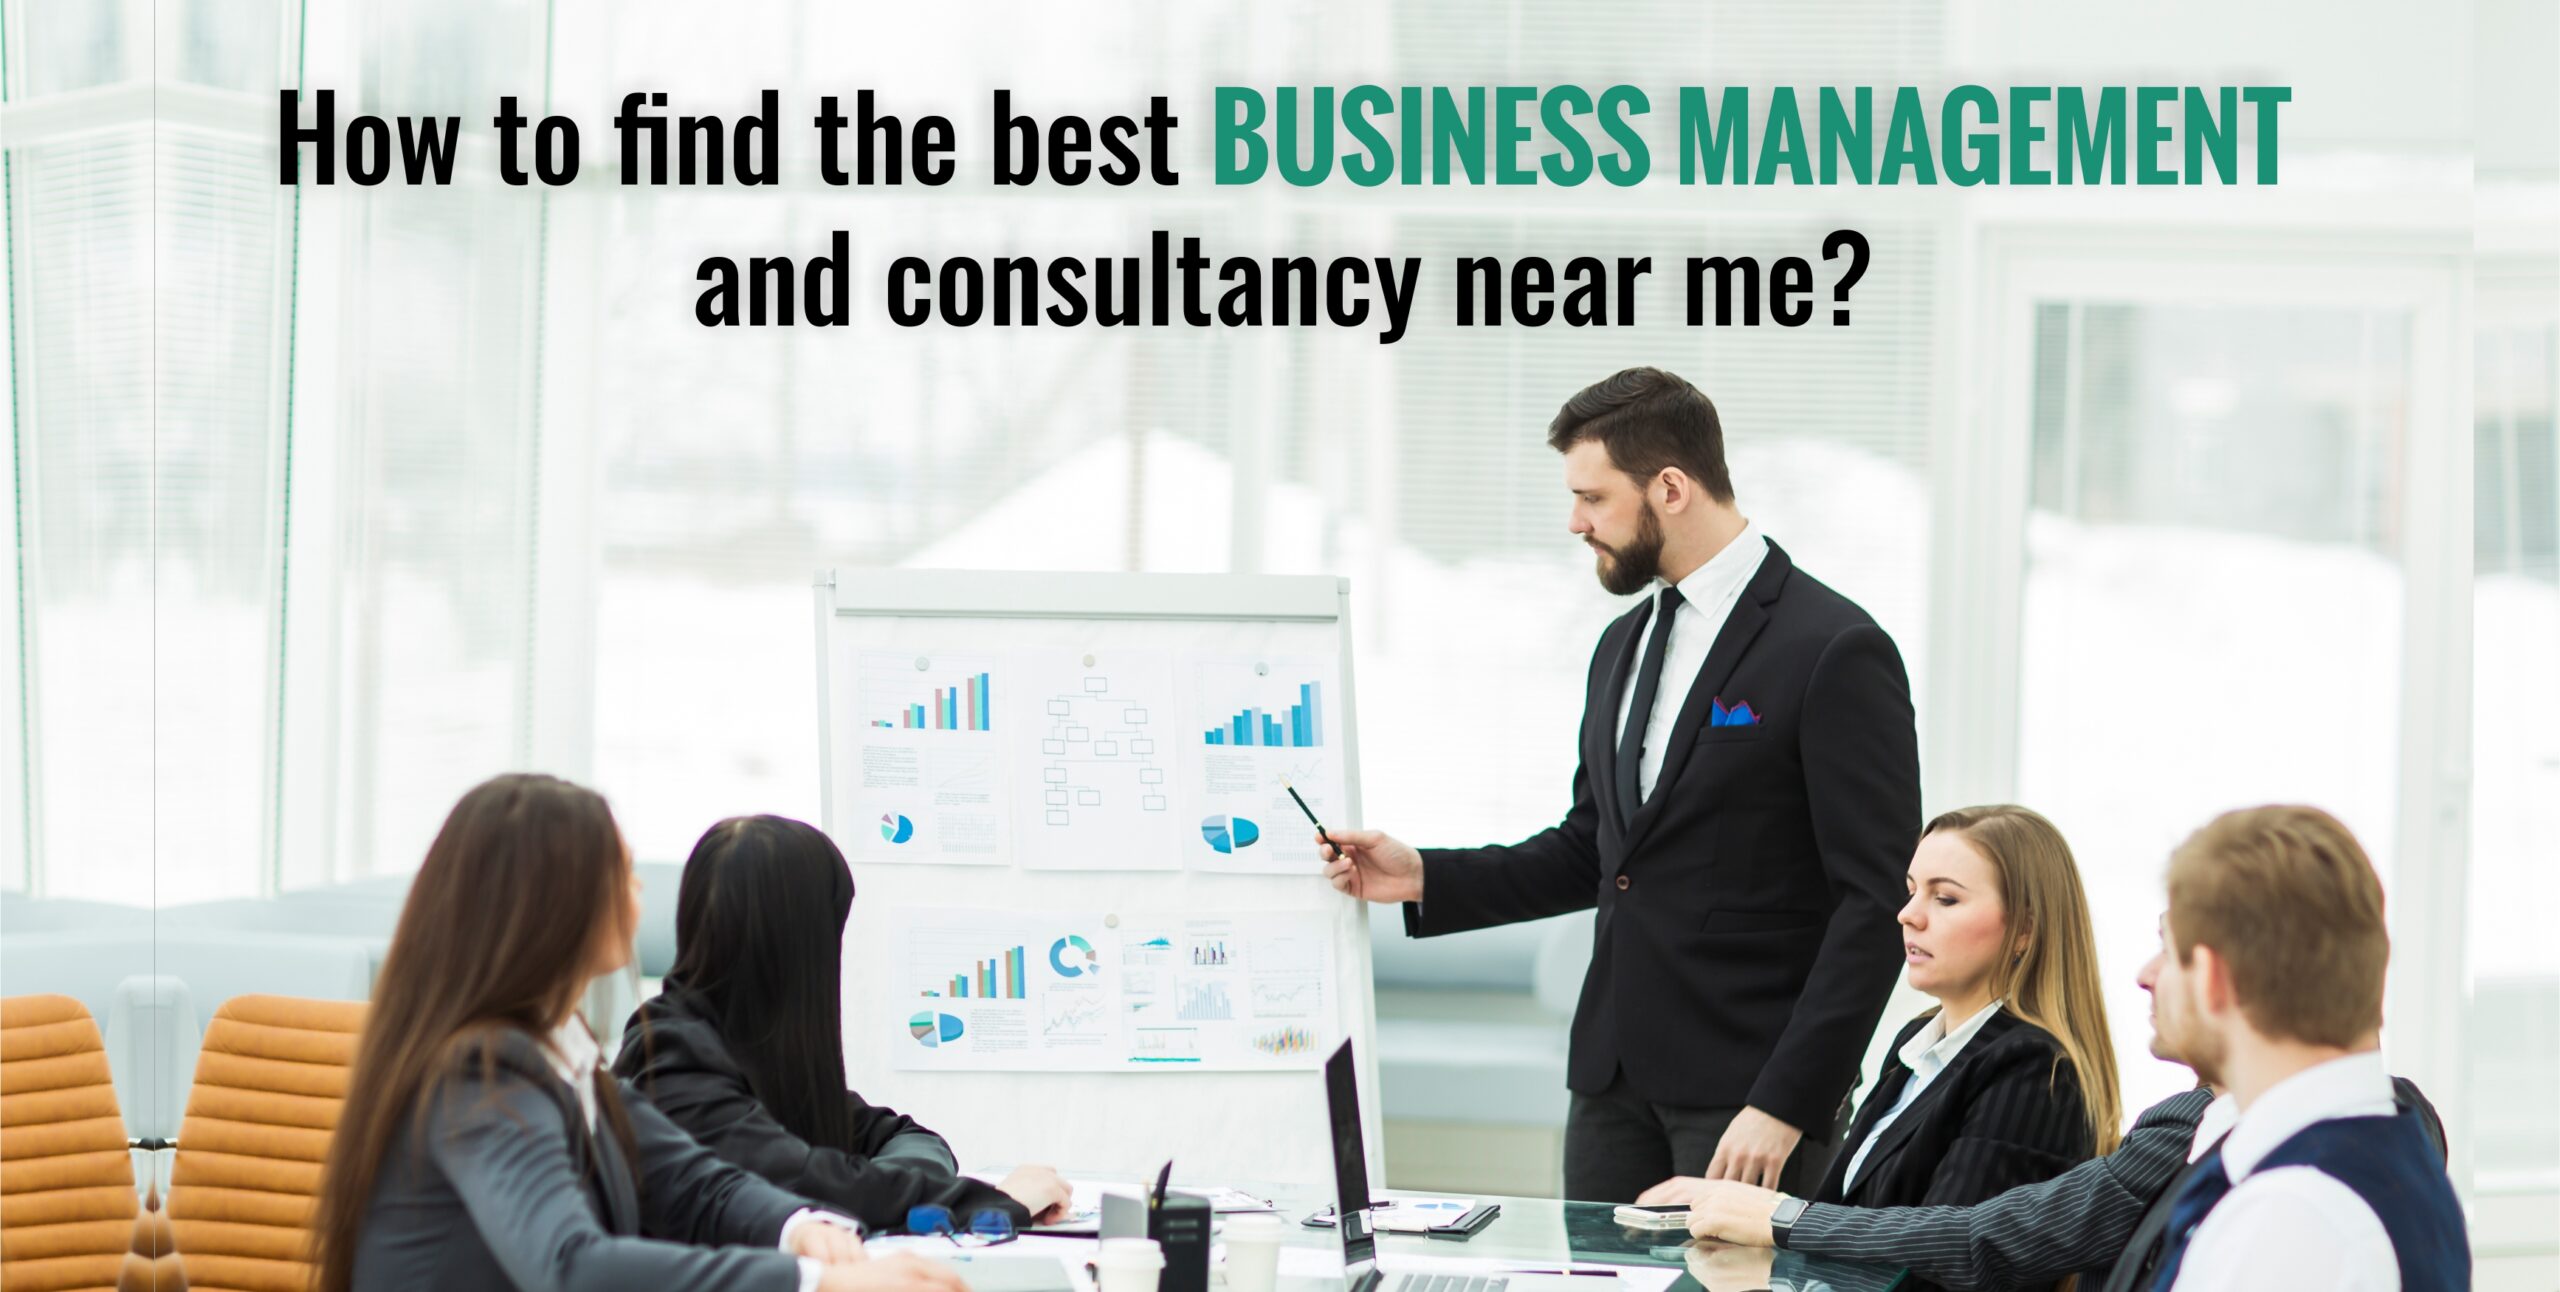 How to find the best business management and consultancy near me?